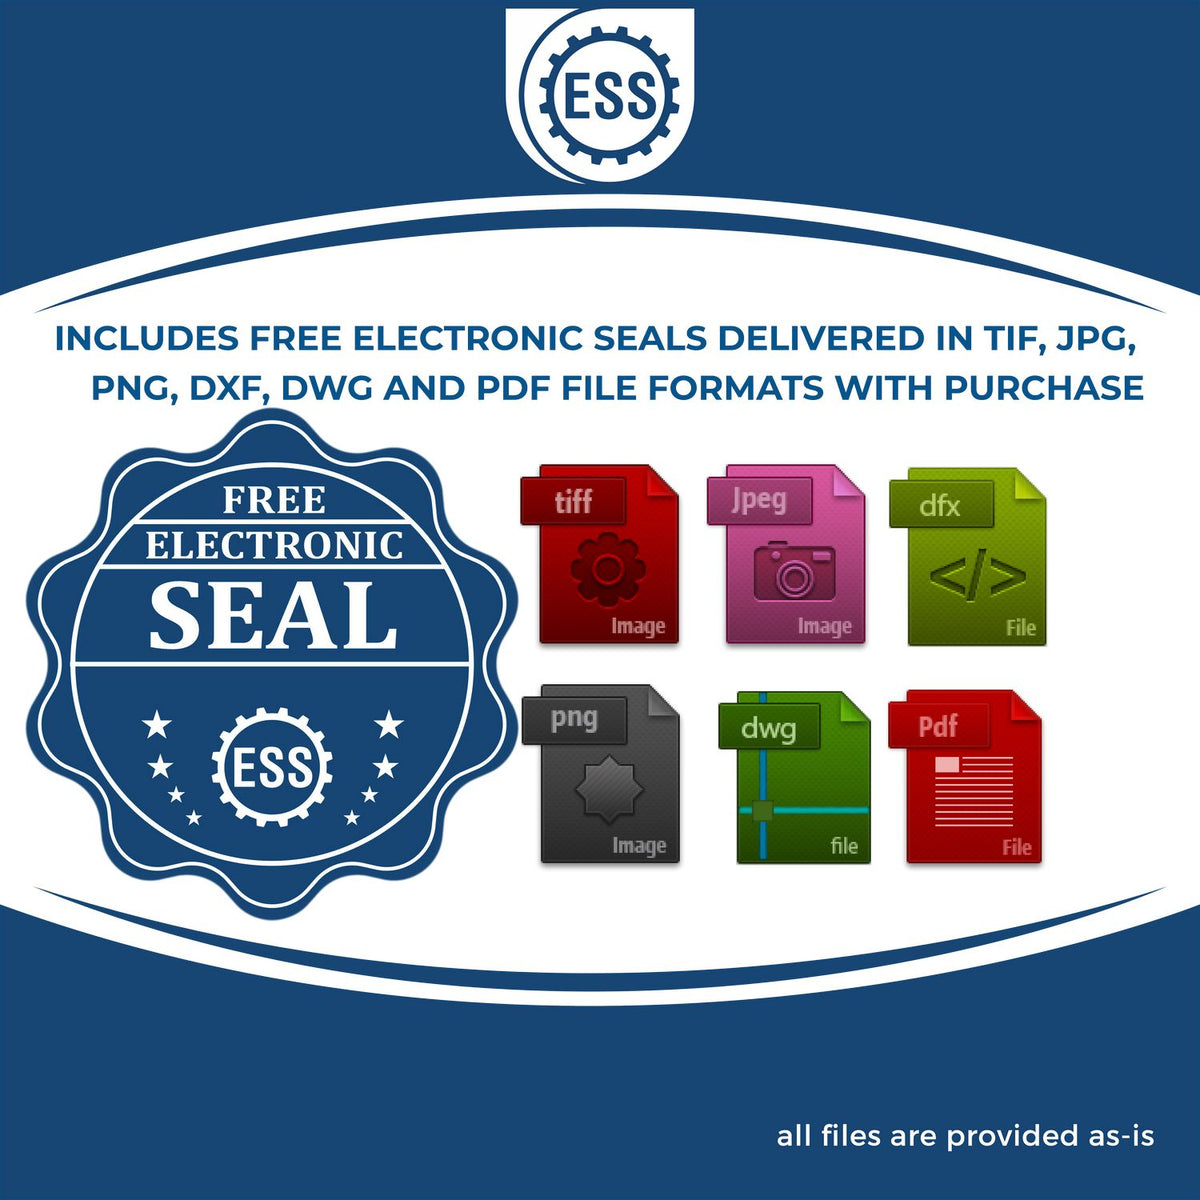 An infographic for the free electronic seal for the State of Kansas Extended Long Reach Engineer Seal illustrating the different file type icons such as DXF, DWG, TIF, JPG and PNG.